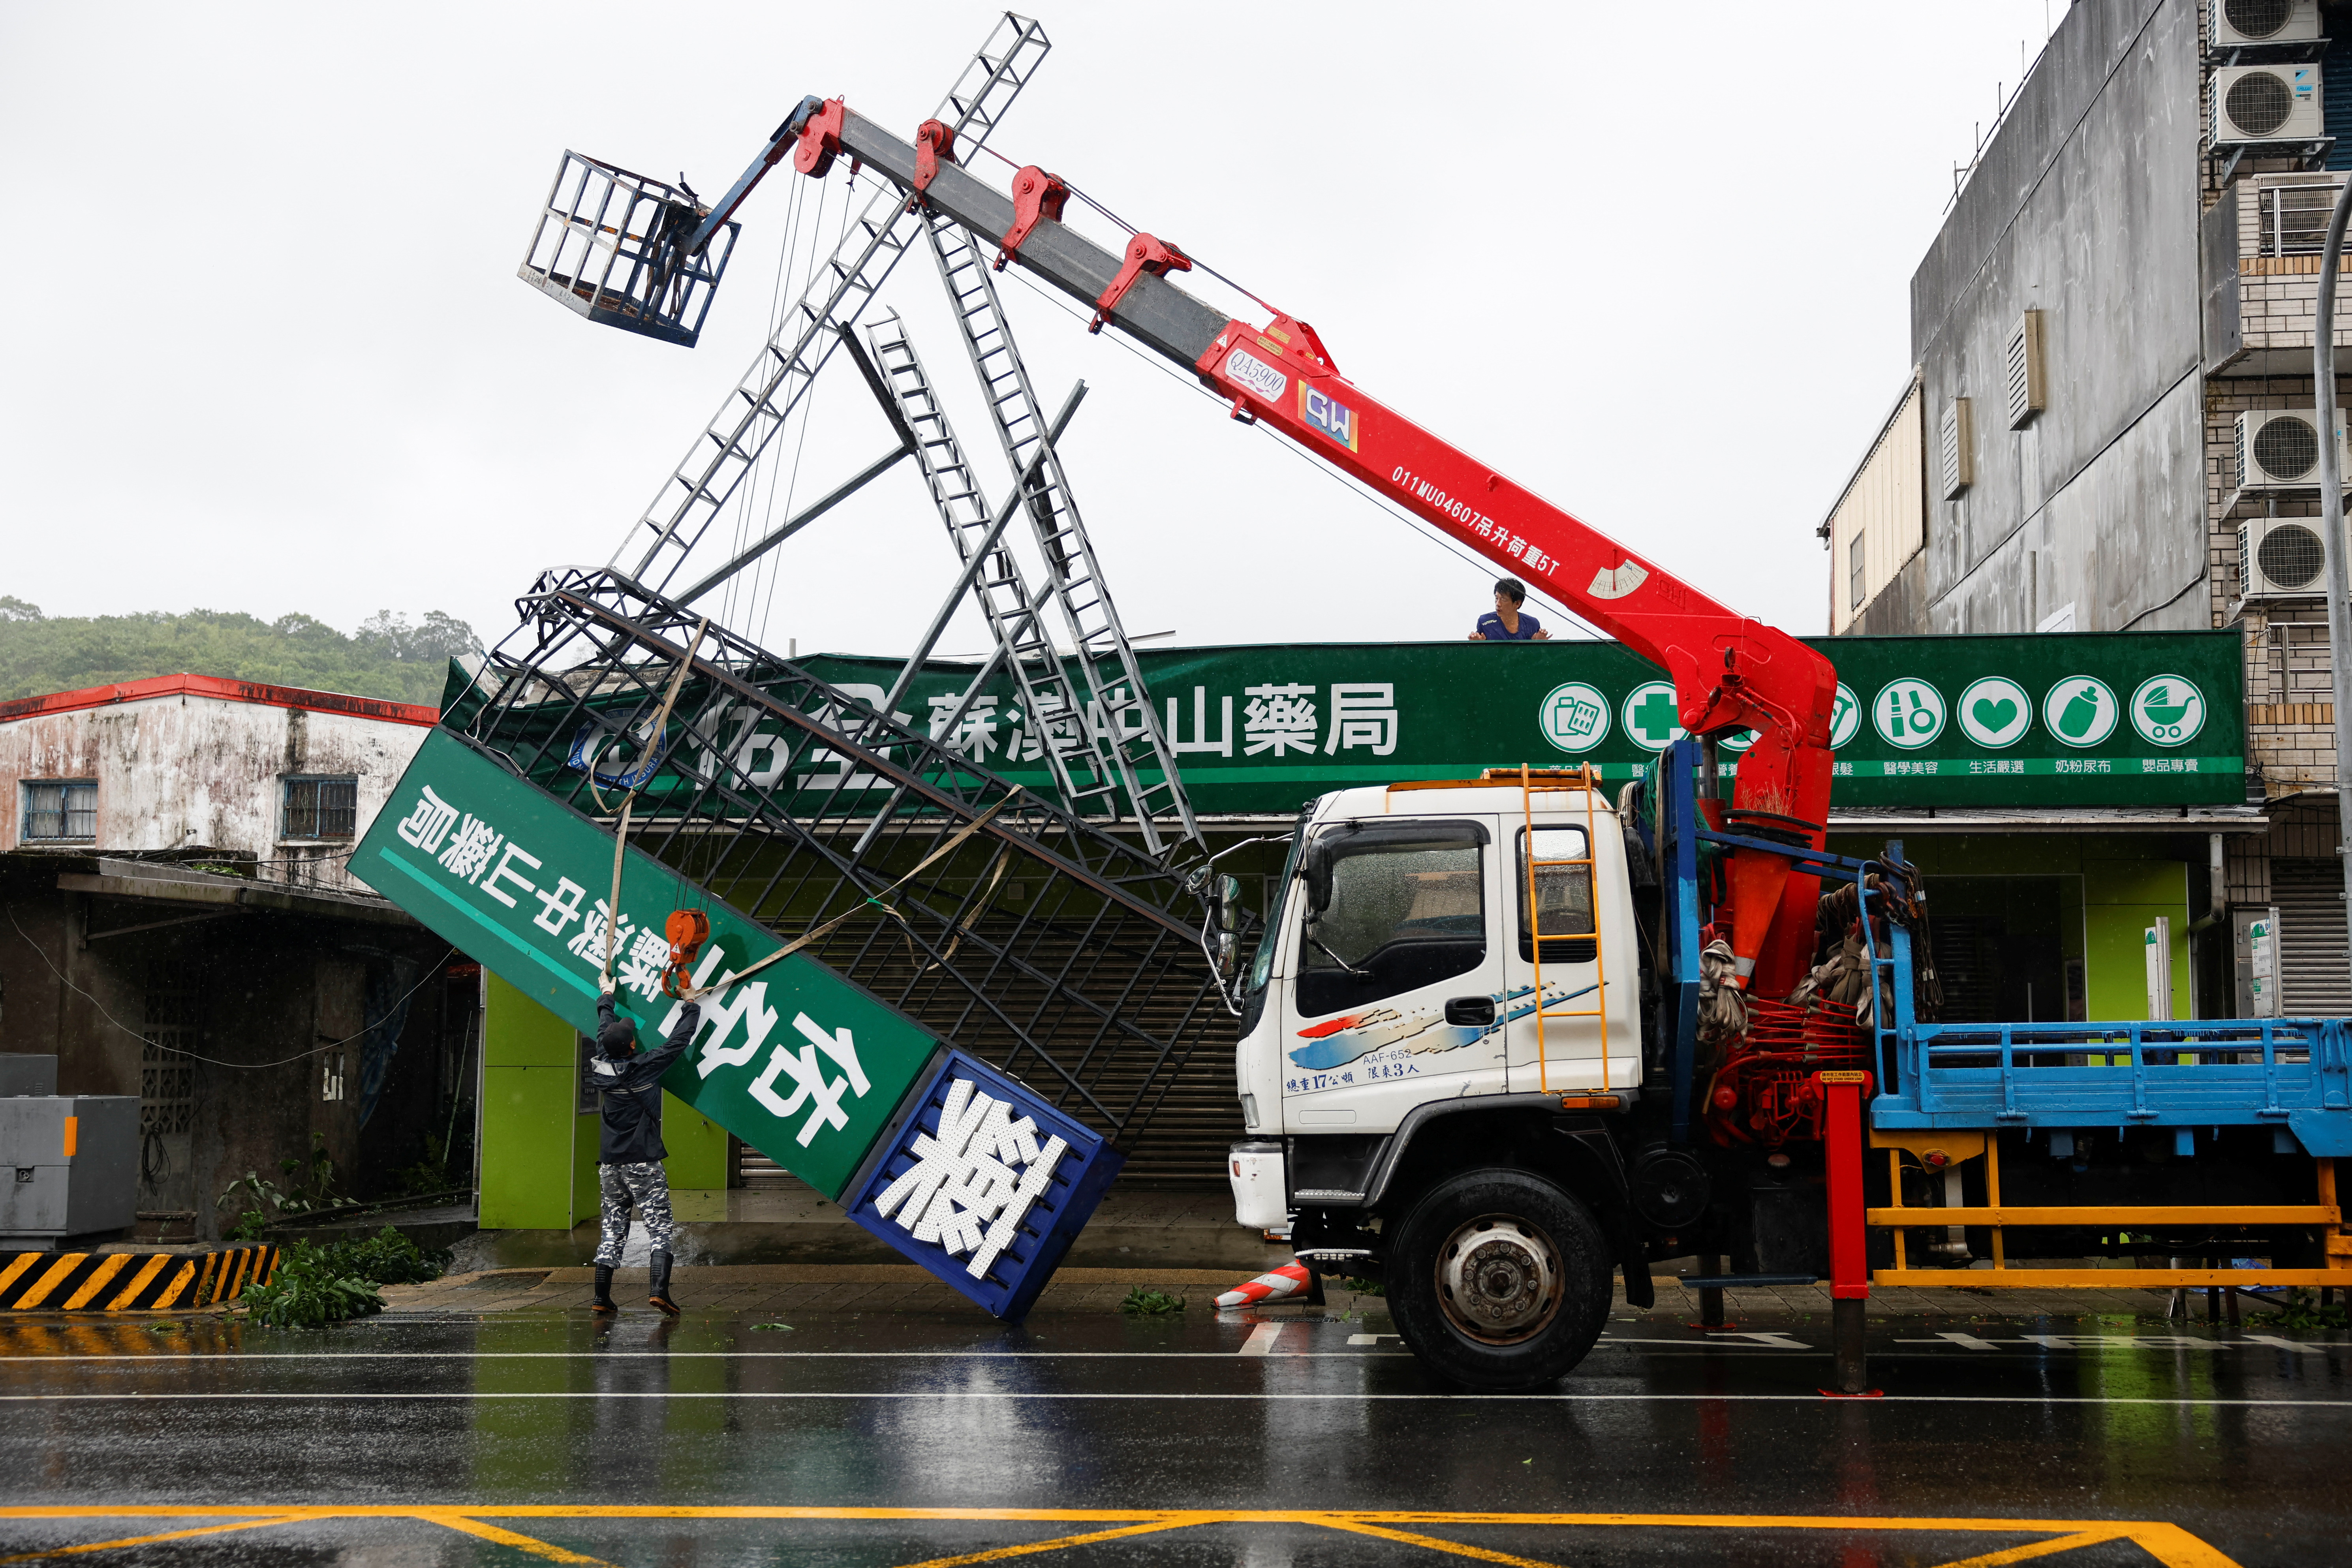 Workers use a crane to remove a fallen sign after Typhoon Gaemi passed northern Taiwan in Yilan